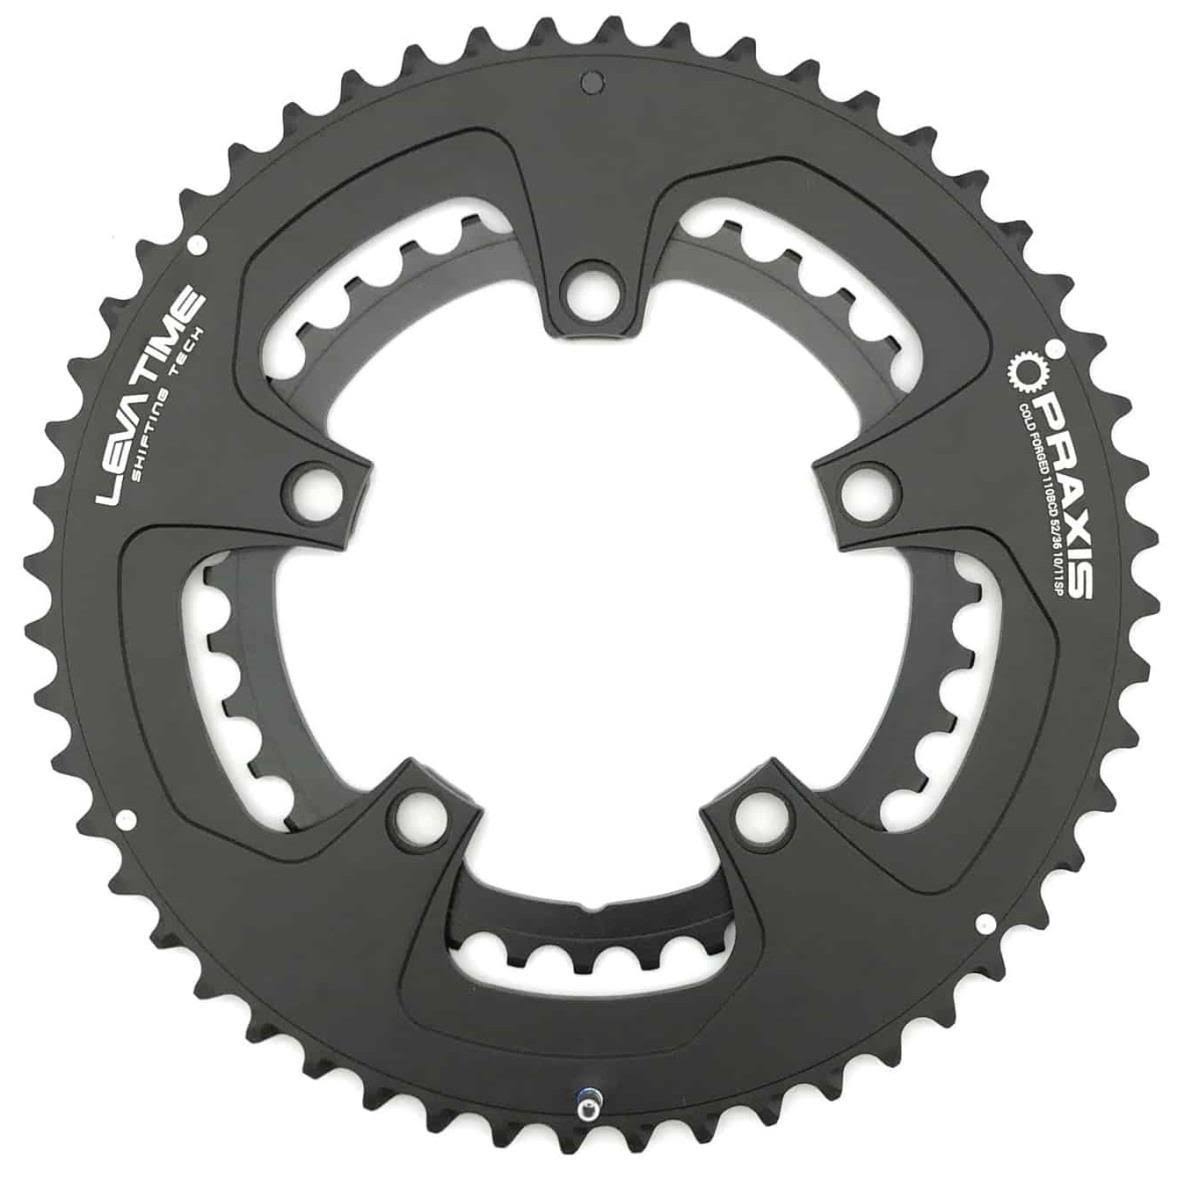 Praxis Works Buzz 110BCD 52/36T Double Road Chainring Set